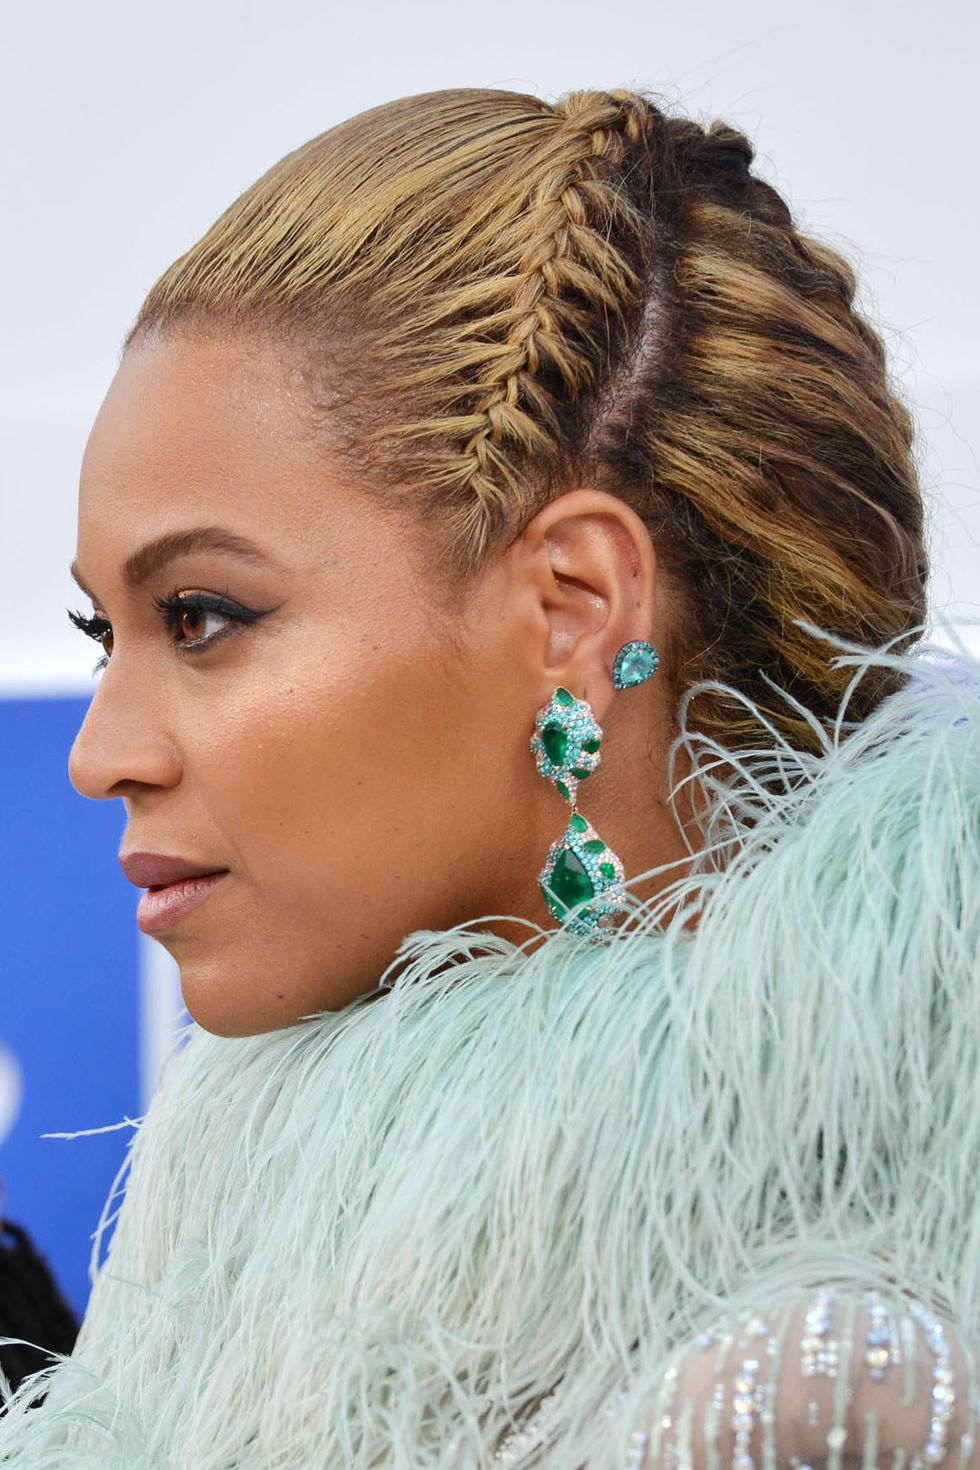 Dutch Braids Are Classic, Protective And These 9 Women Are Rocking